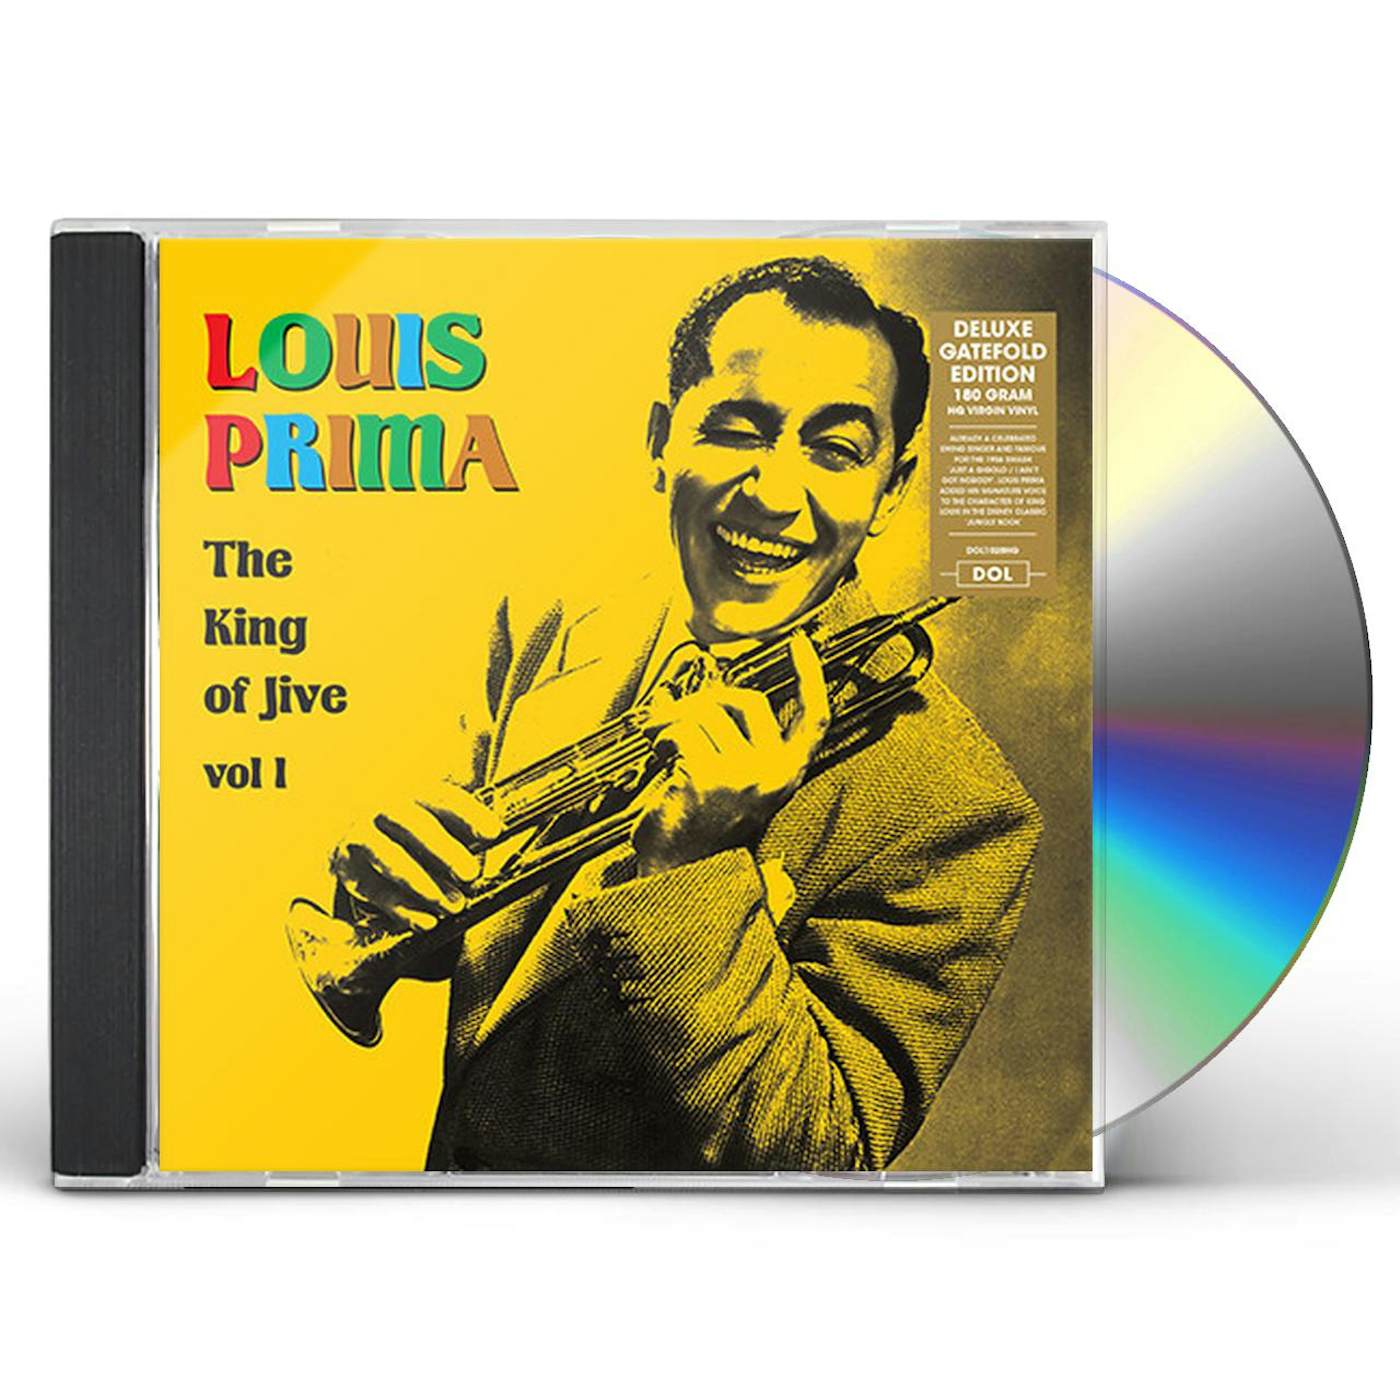 Louis Prima : Just A Gigolo (LP, Vinyl record album) -- Dusty Groove is  Chicago's Online Record Store